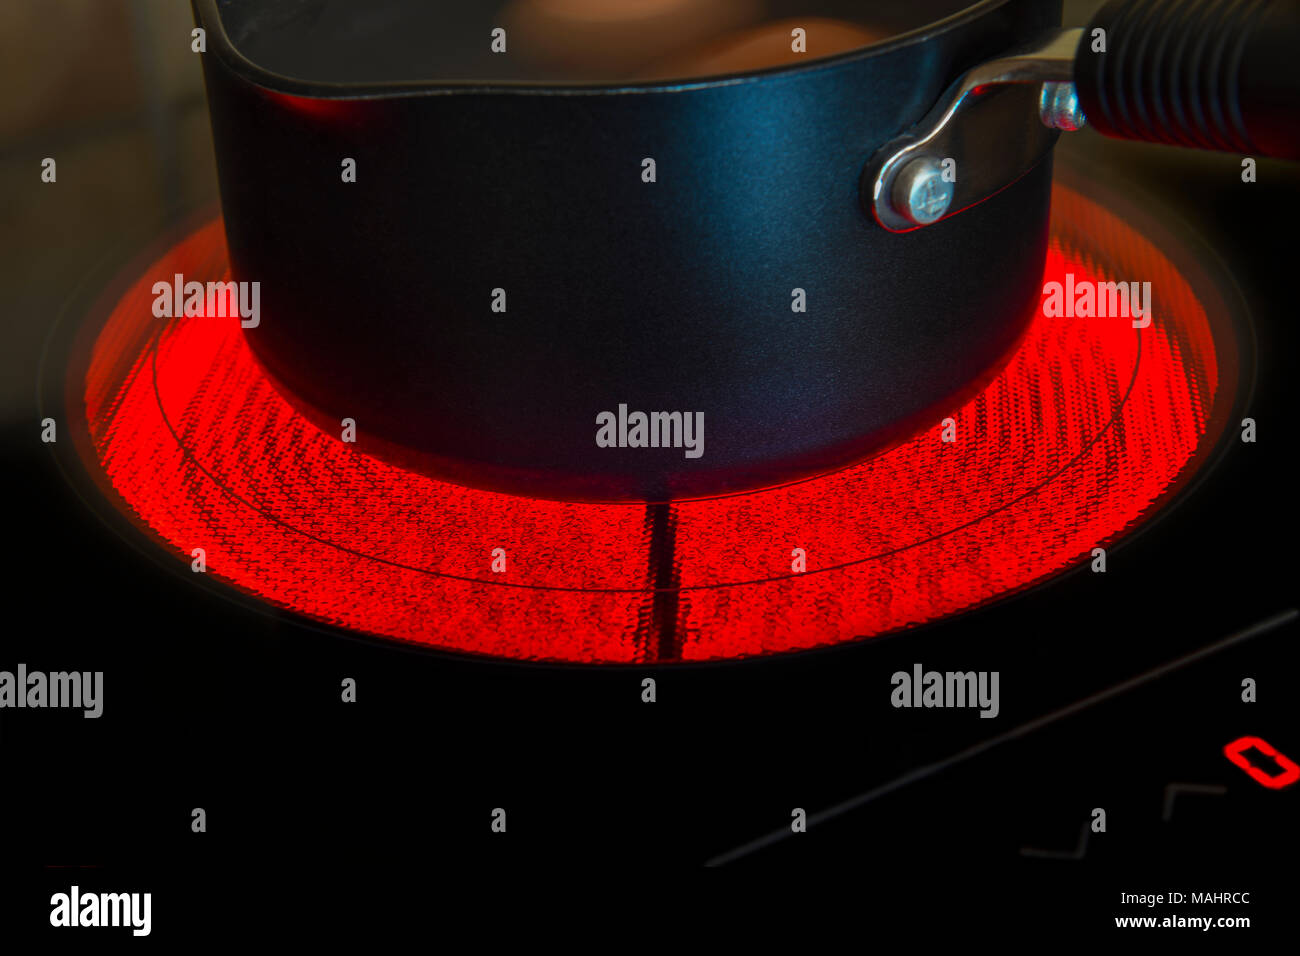 Saucepan on a glowing electric ceramic cooking hob Stock Photo